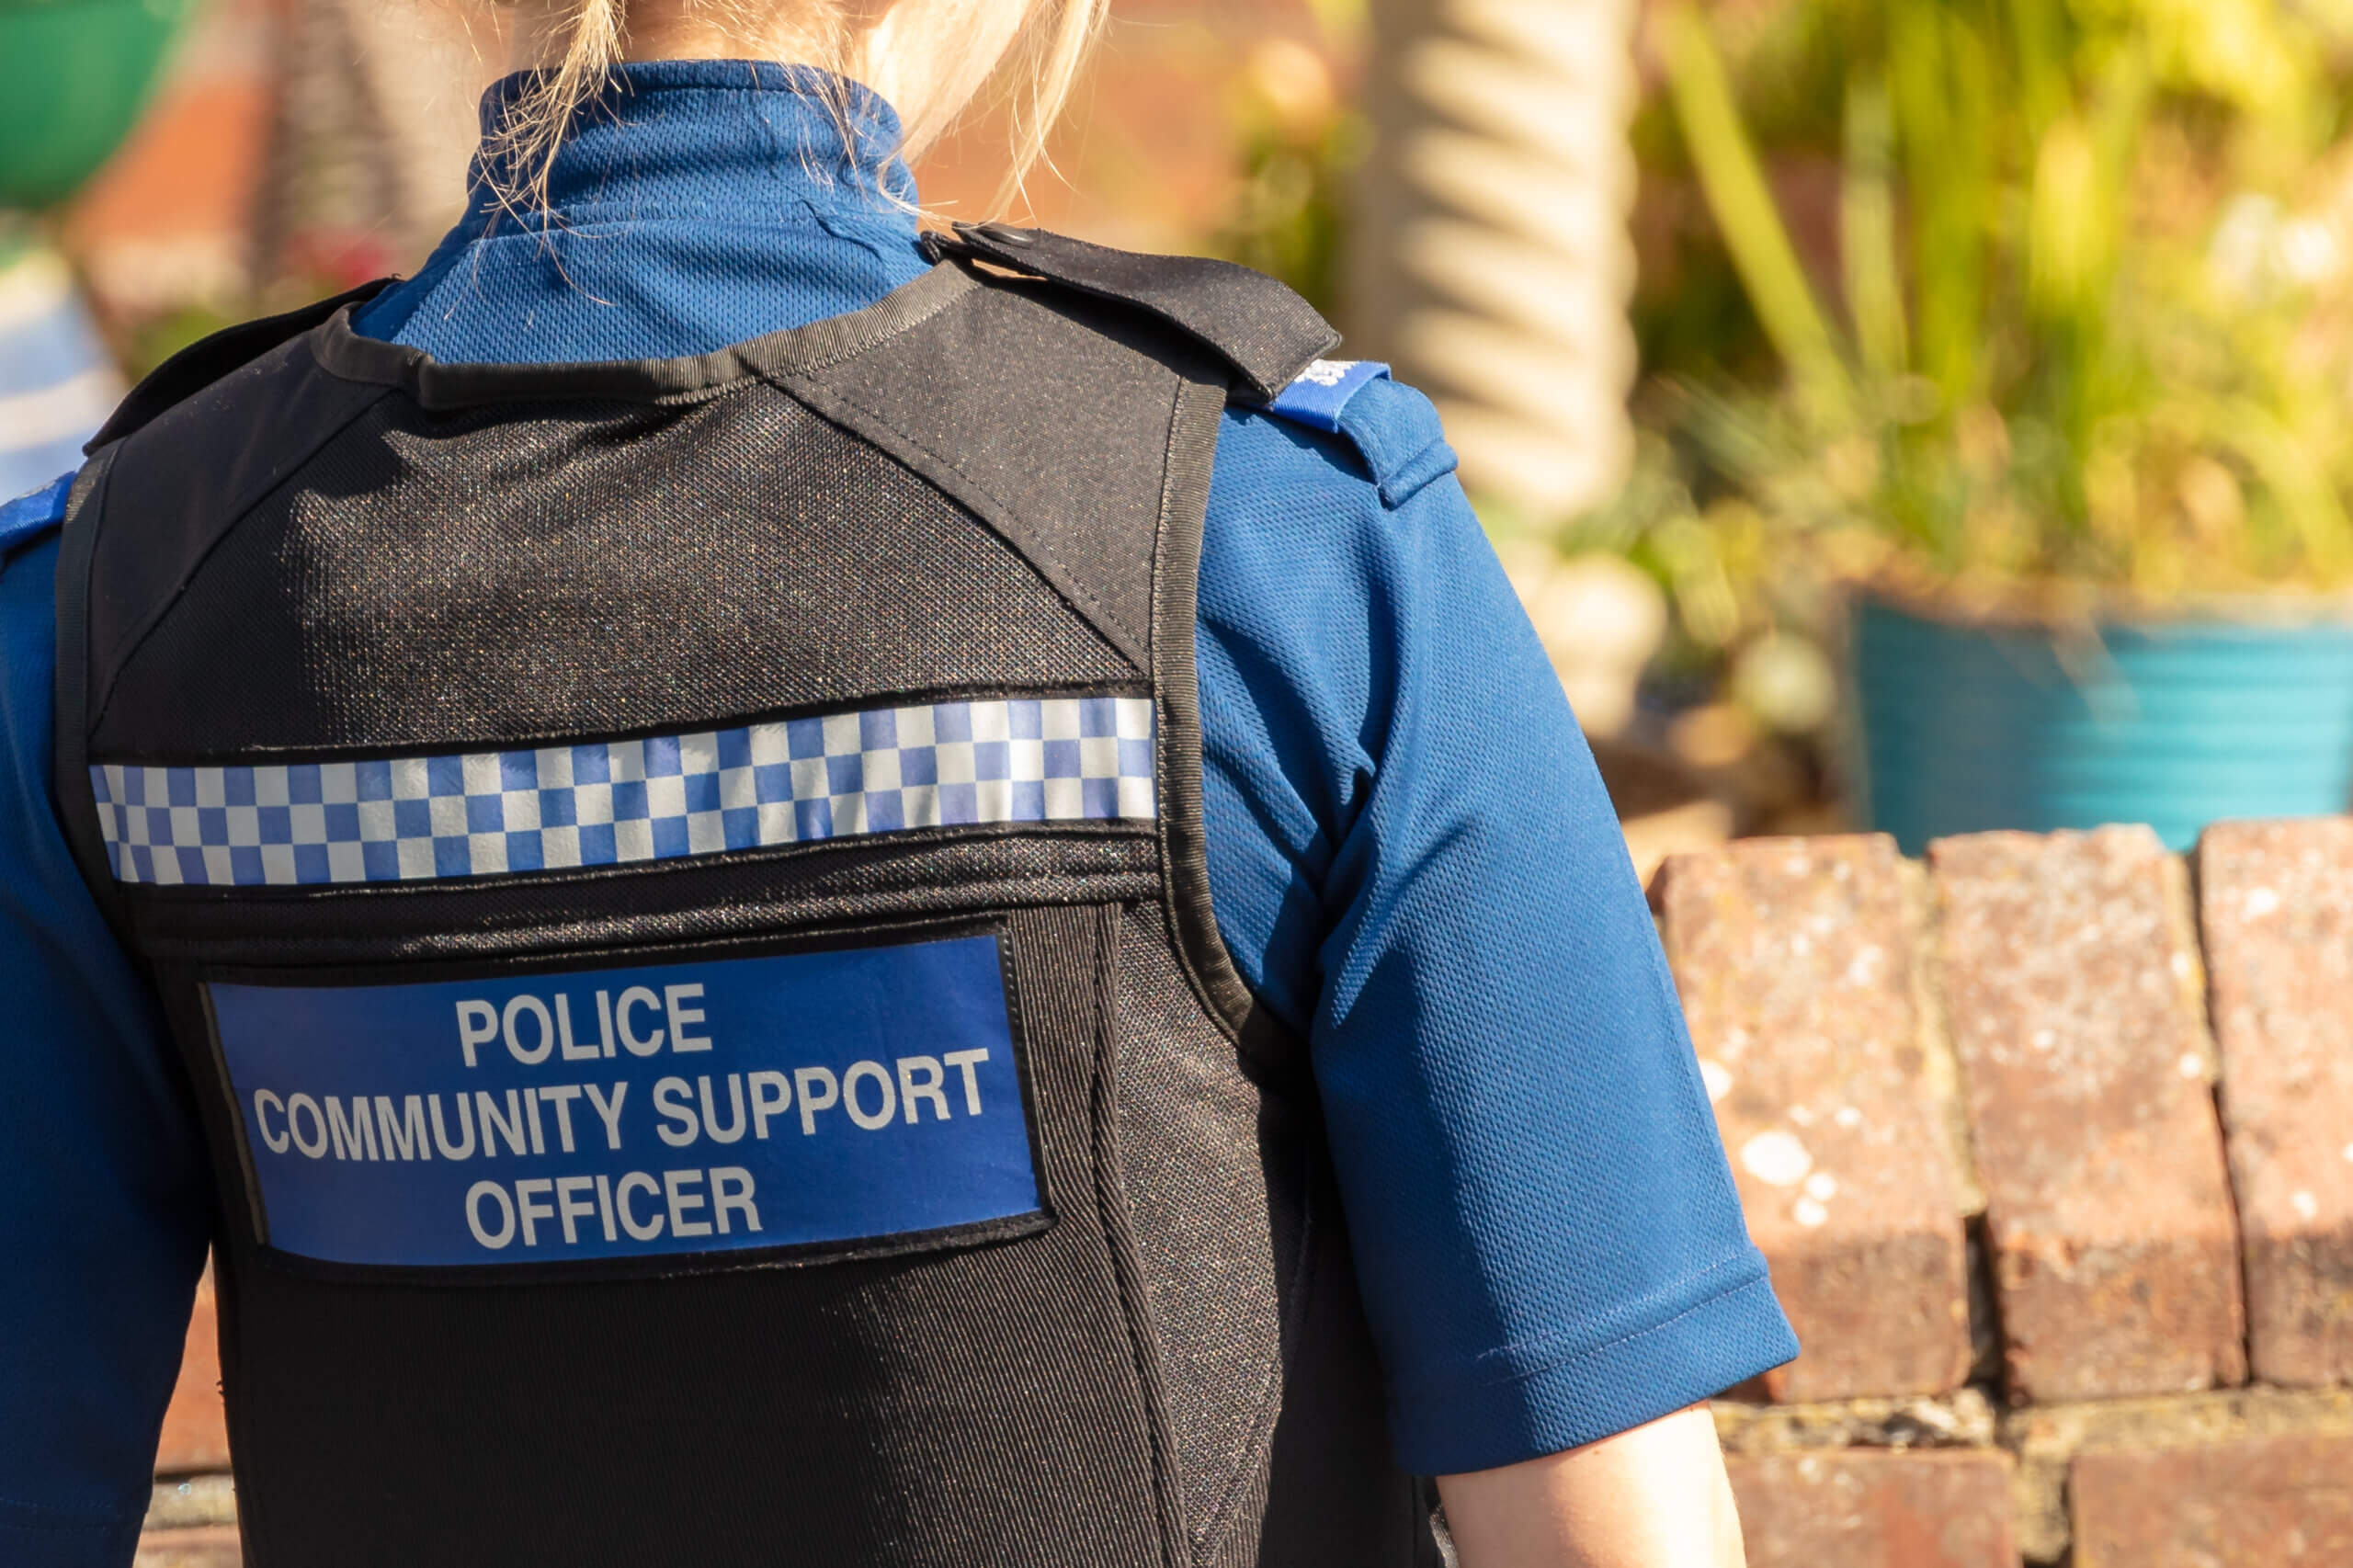 Police Community Support Officer (PCSO)